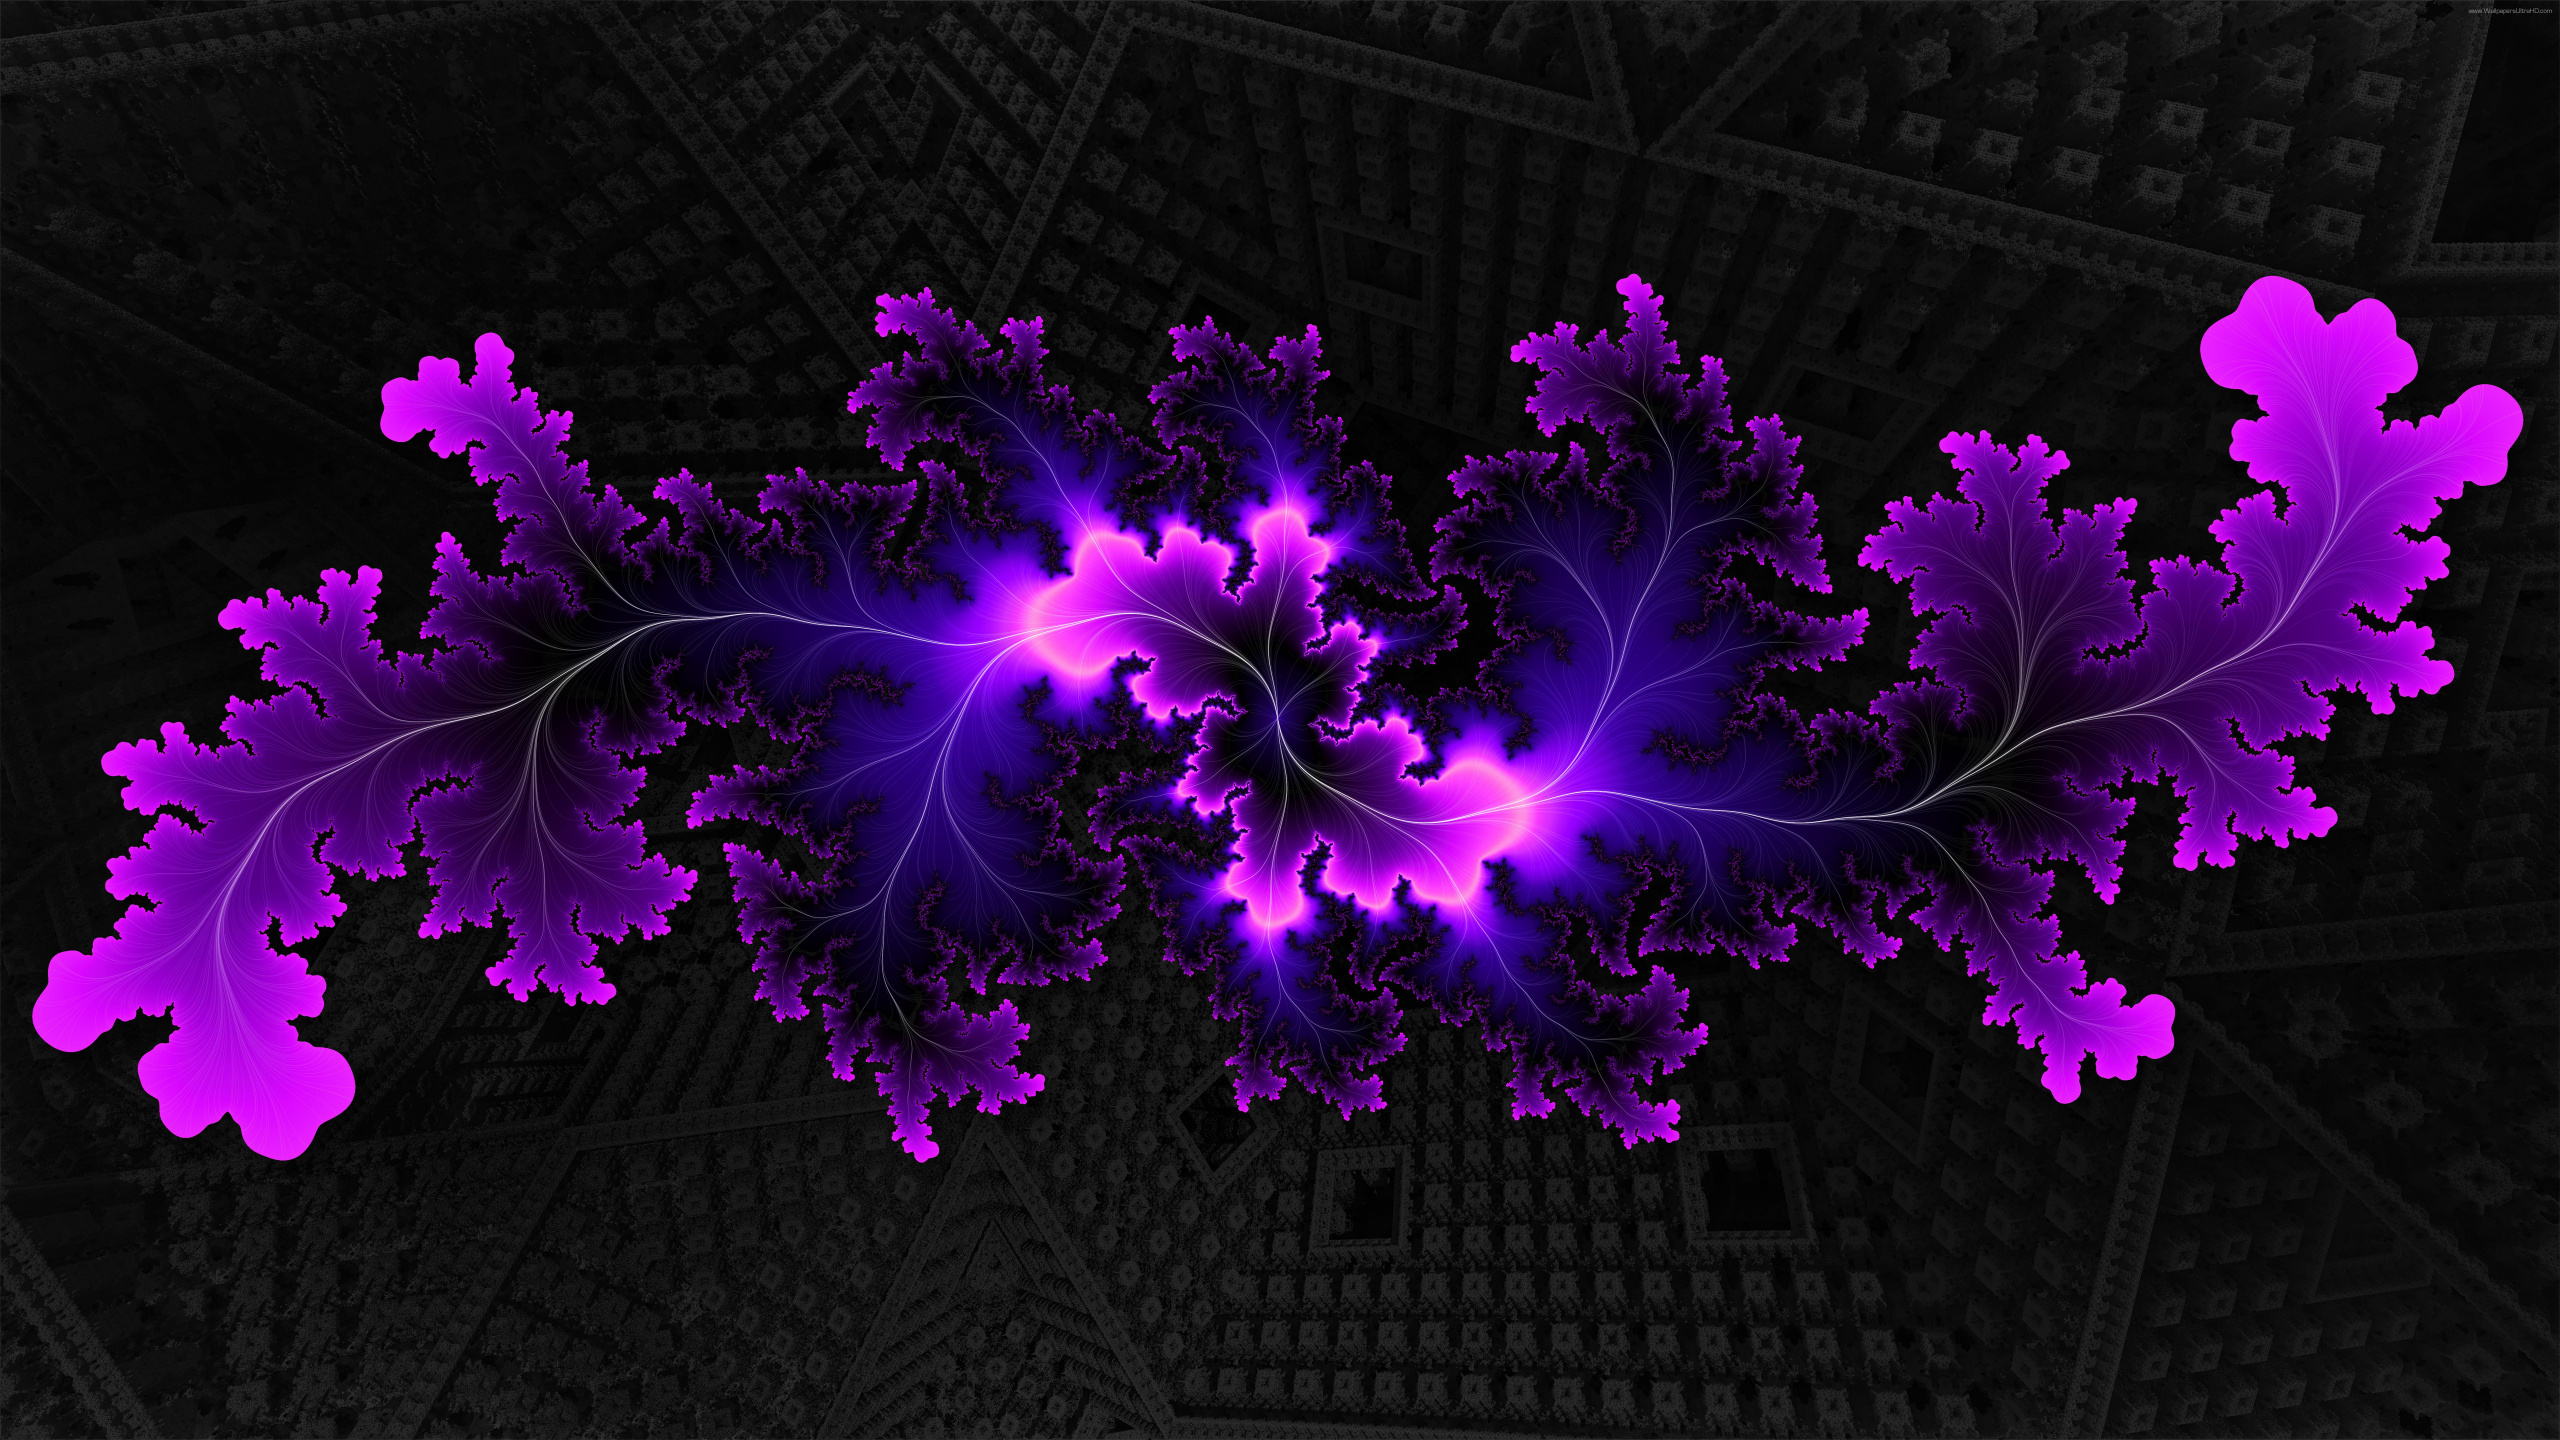 Purple Flower Petals on Black and White Textile. Wallpaper in 2560x1440 Resolution